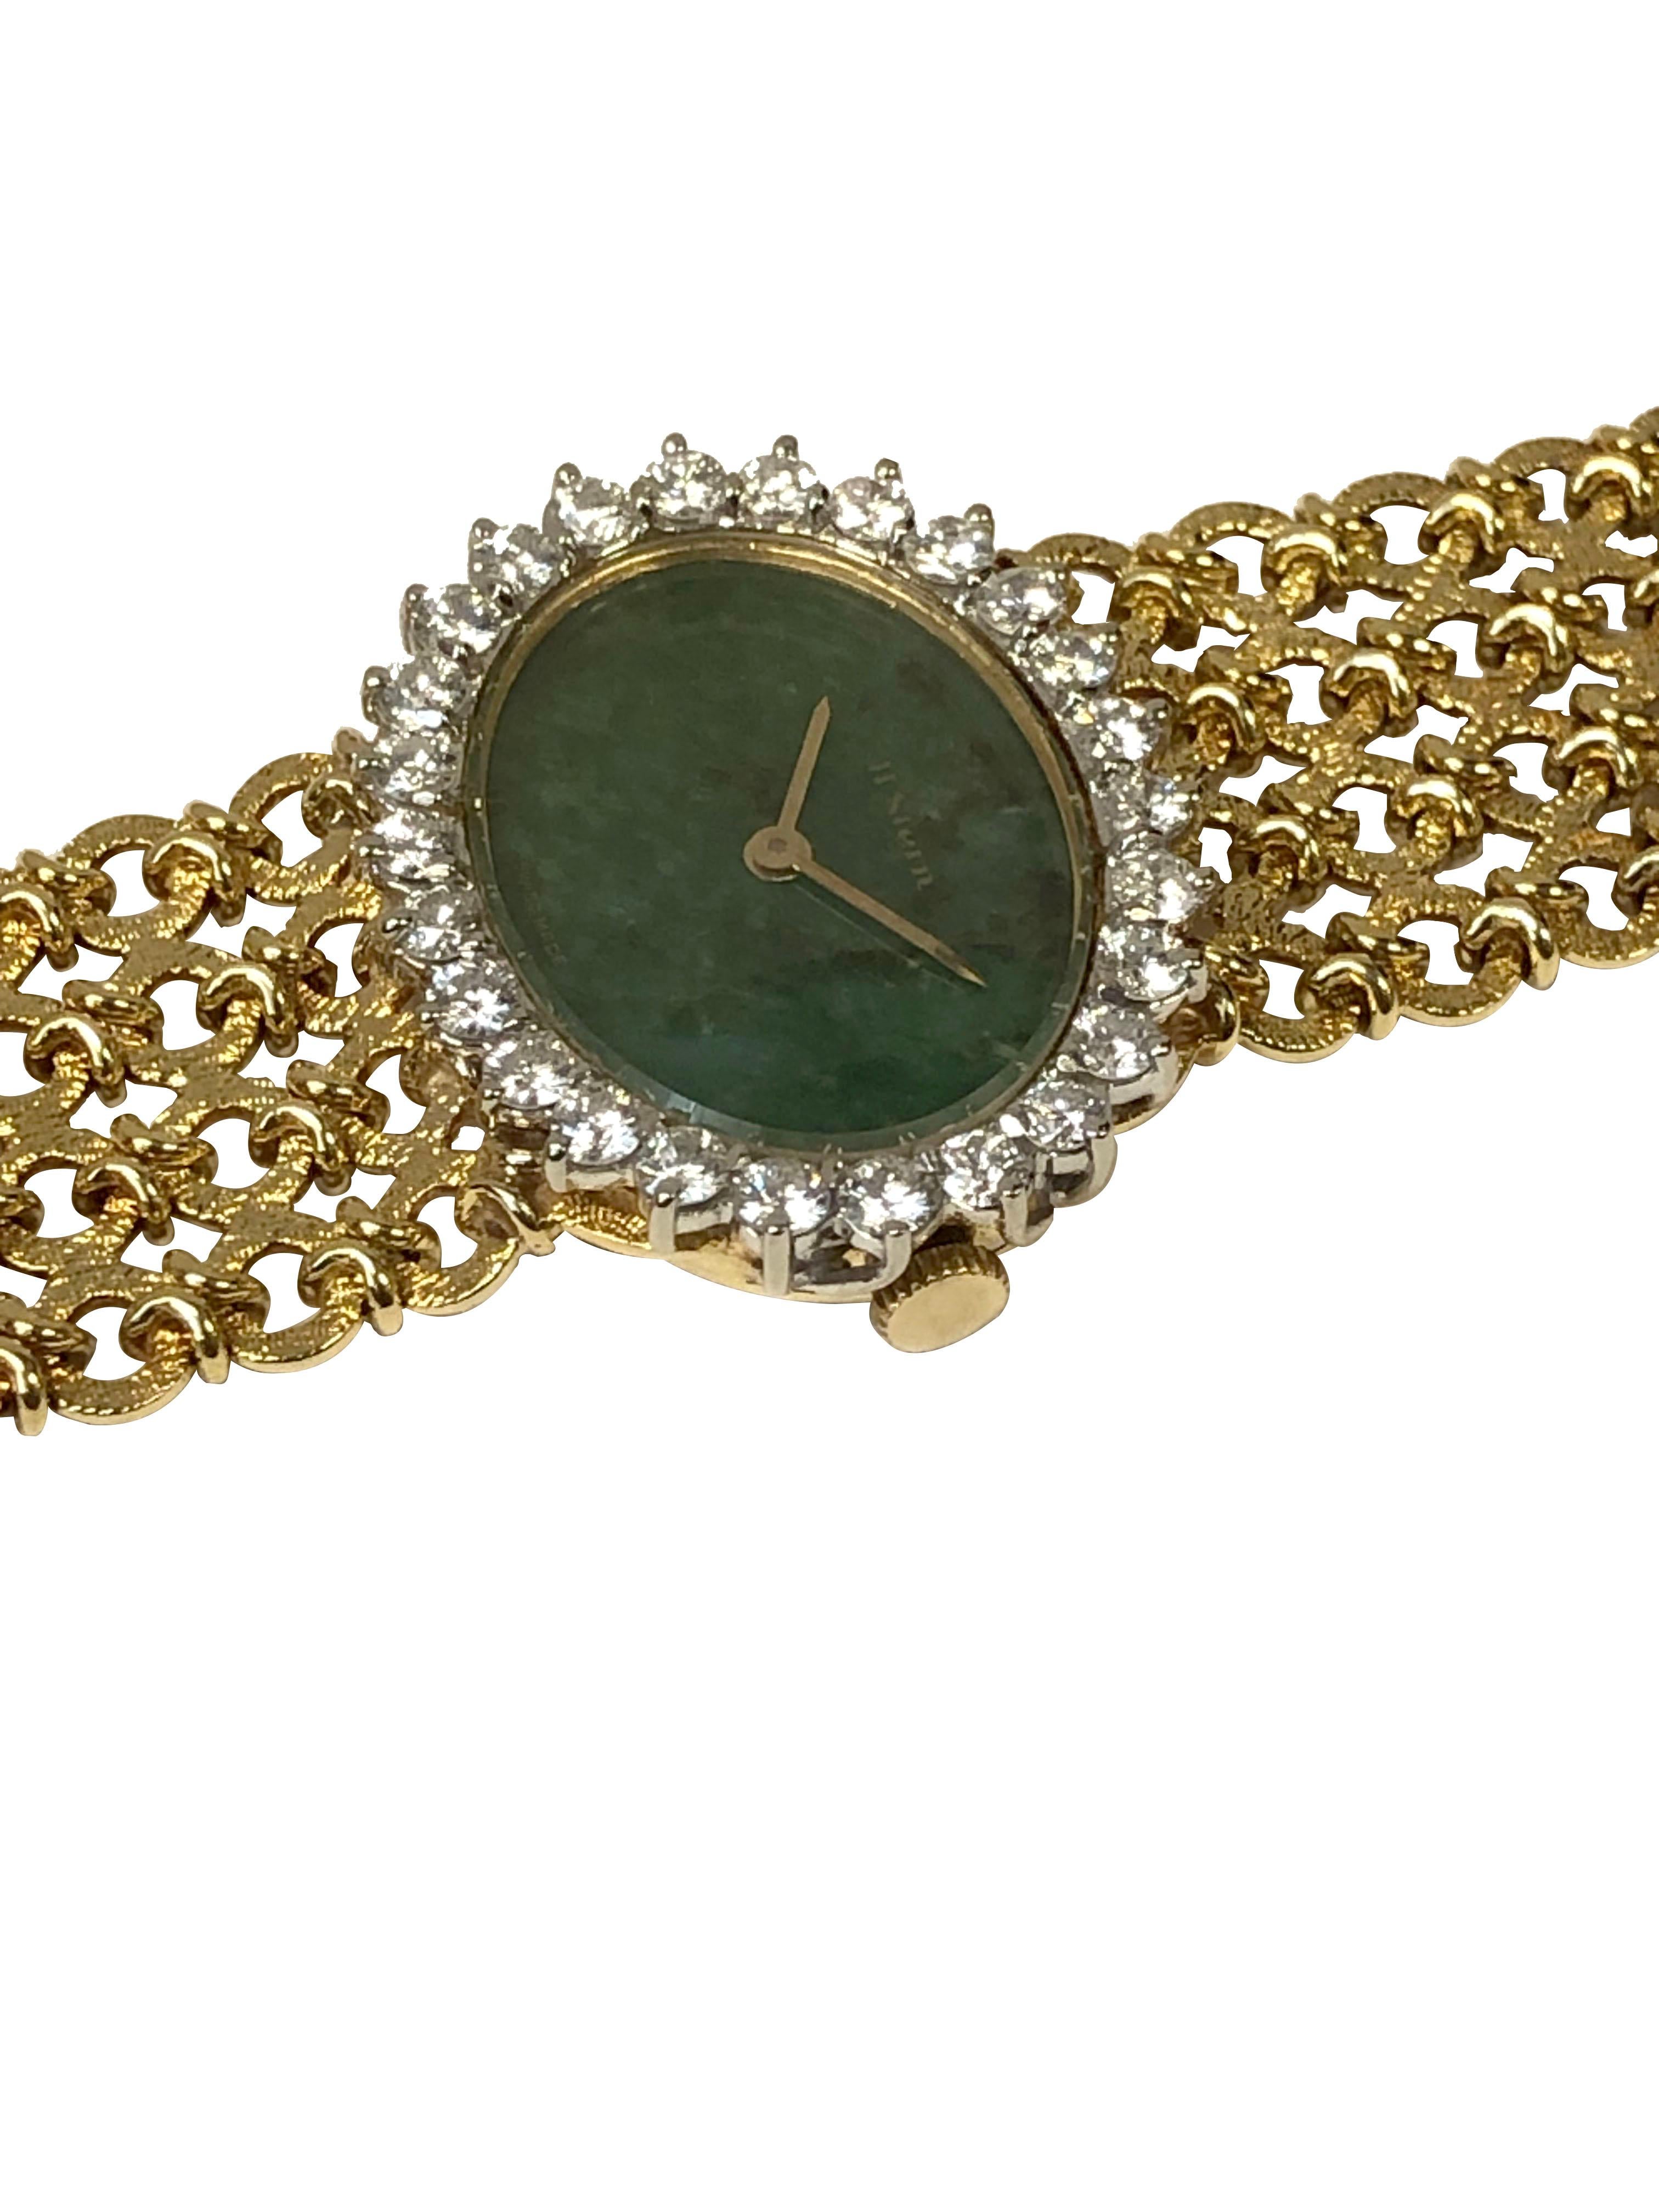 Circa 1970s H. Stern Ladies Wrist Watch, 30 x 25 M.M. 18k Yellow Gold 2 piece case, Diamond set Bezel of Round Brilliant cuts of Fine Color and Clarity totaling approximately 1 Carat. Nephrite stone dial, 17 jewel mechanical, manual wind movement.